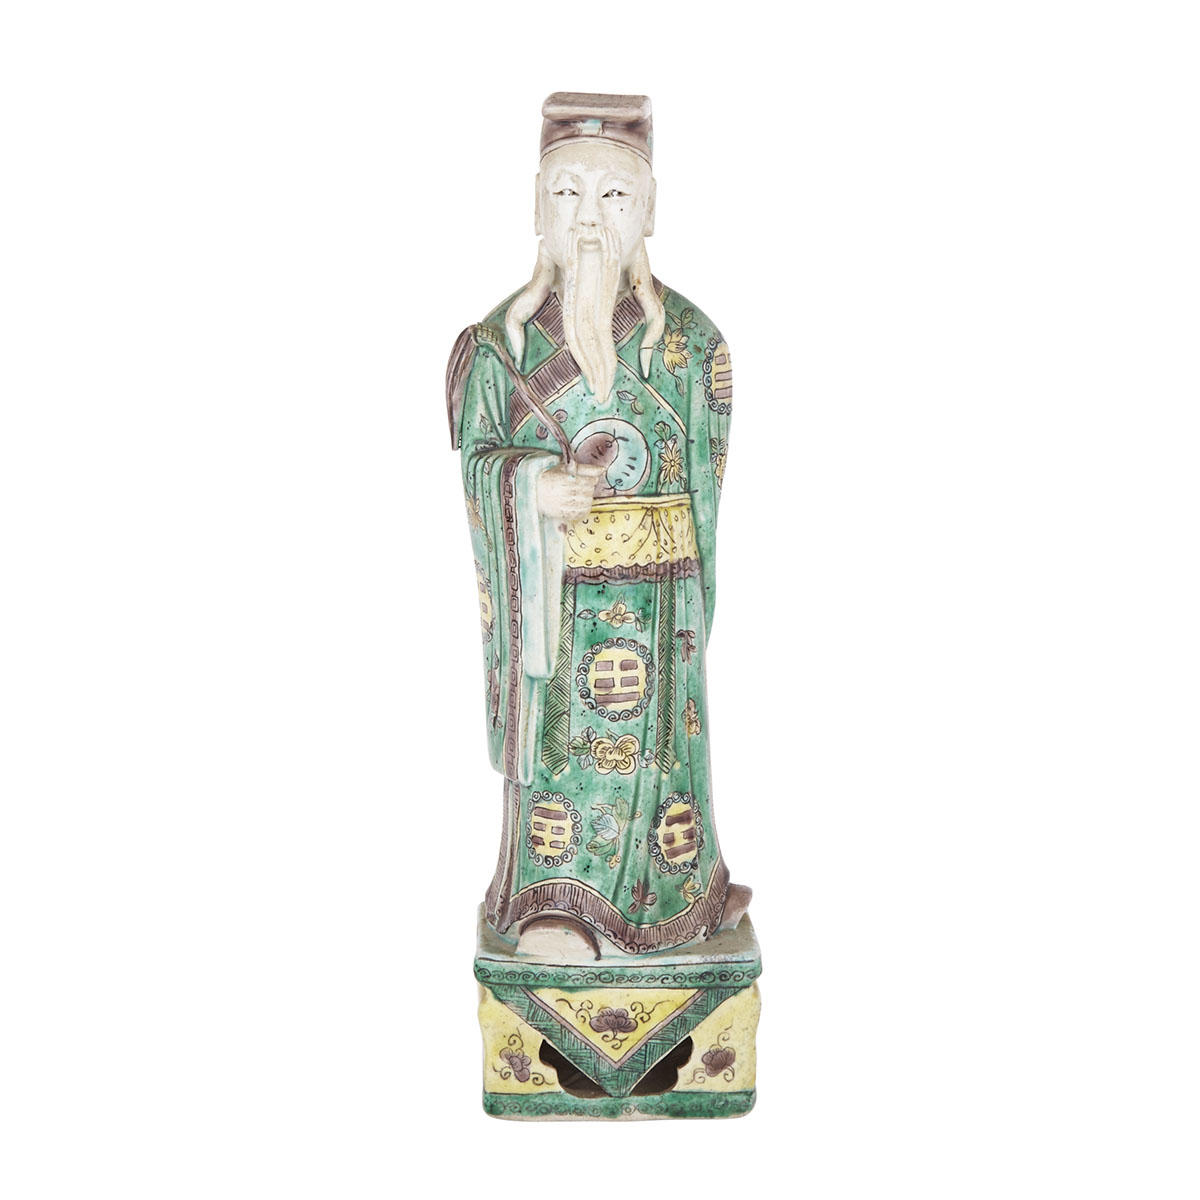 A Biscuit-Glazed Famille-Verte Figure of Immortal, Lu Dongbin, Mid-Qing Dynasty